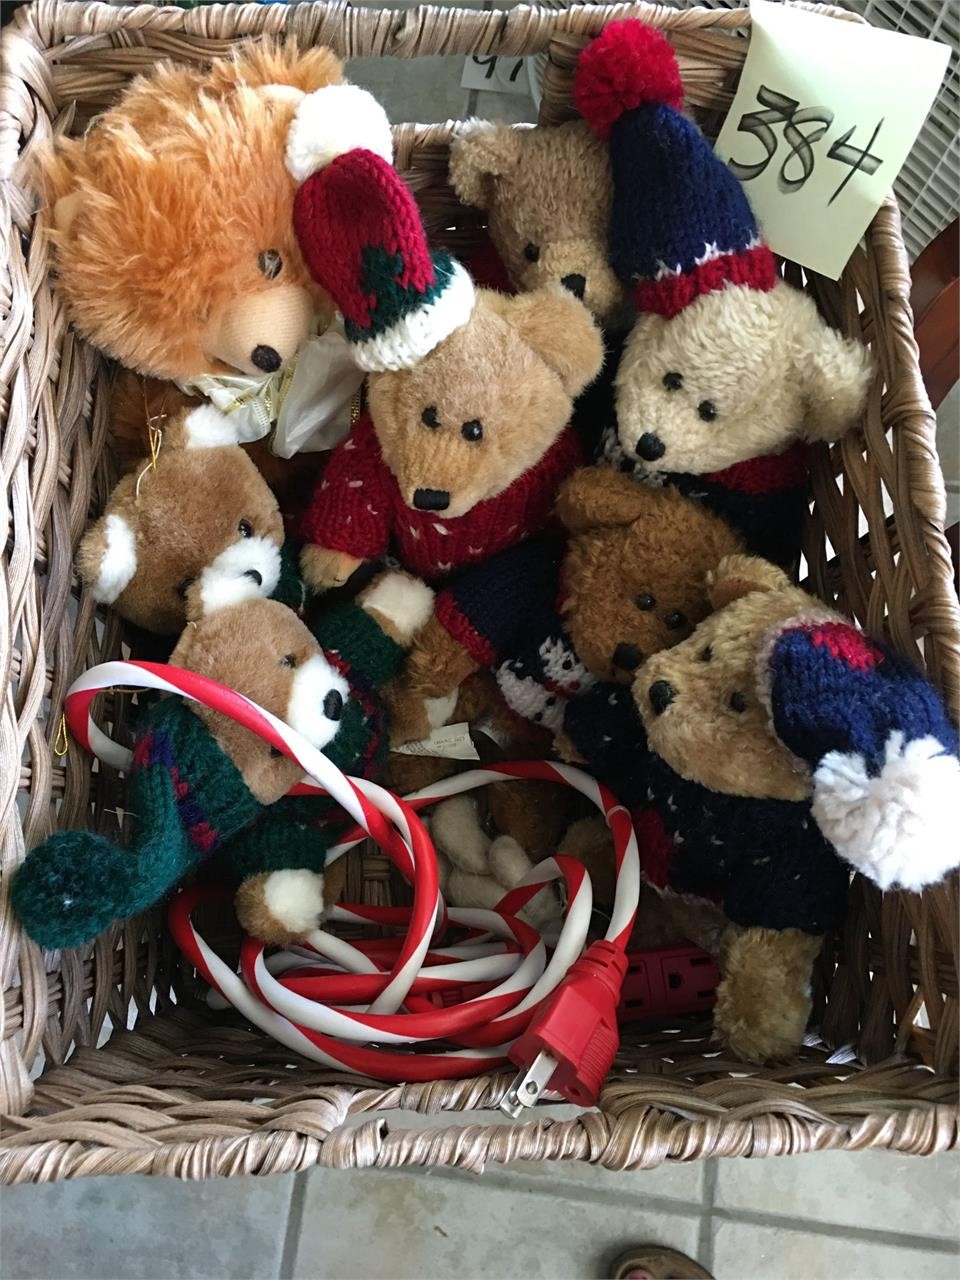 Bears in a Basket Lot w/candy cane extension cord